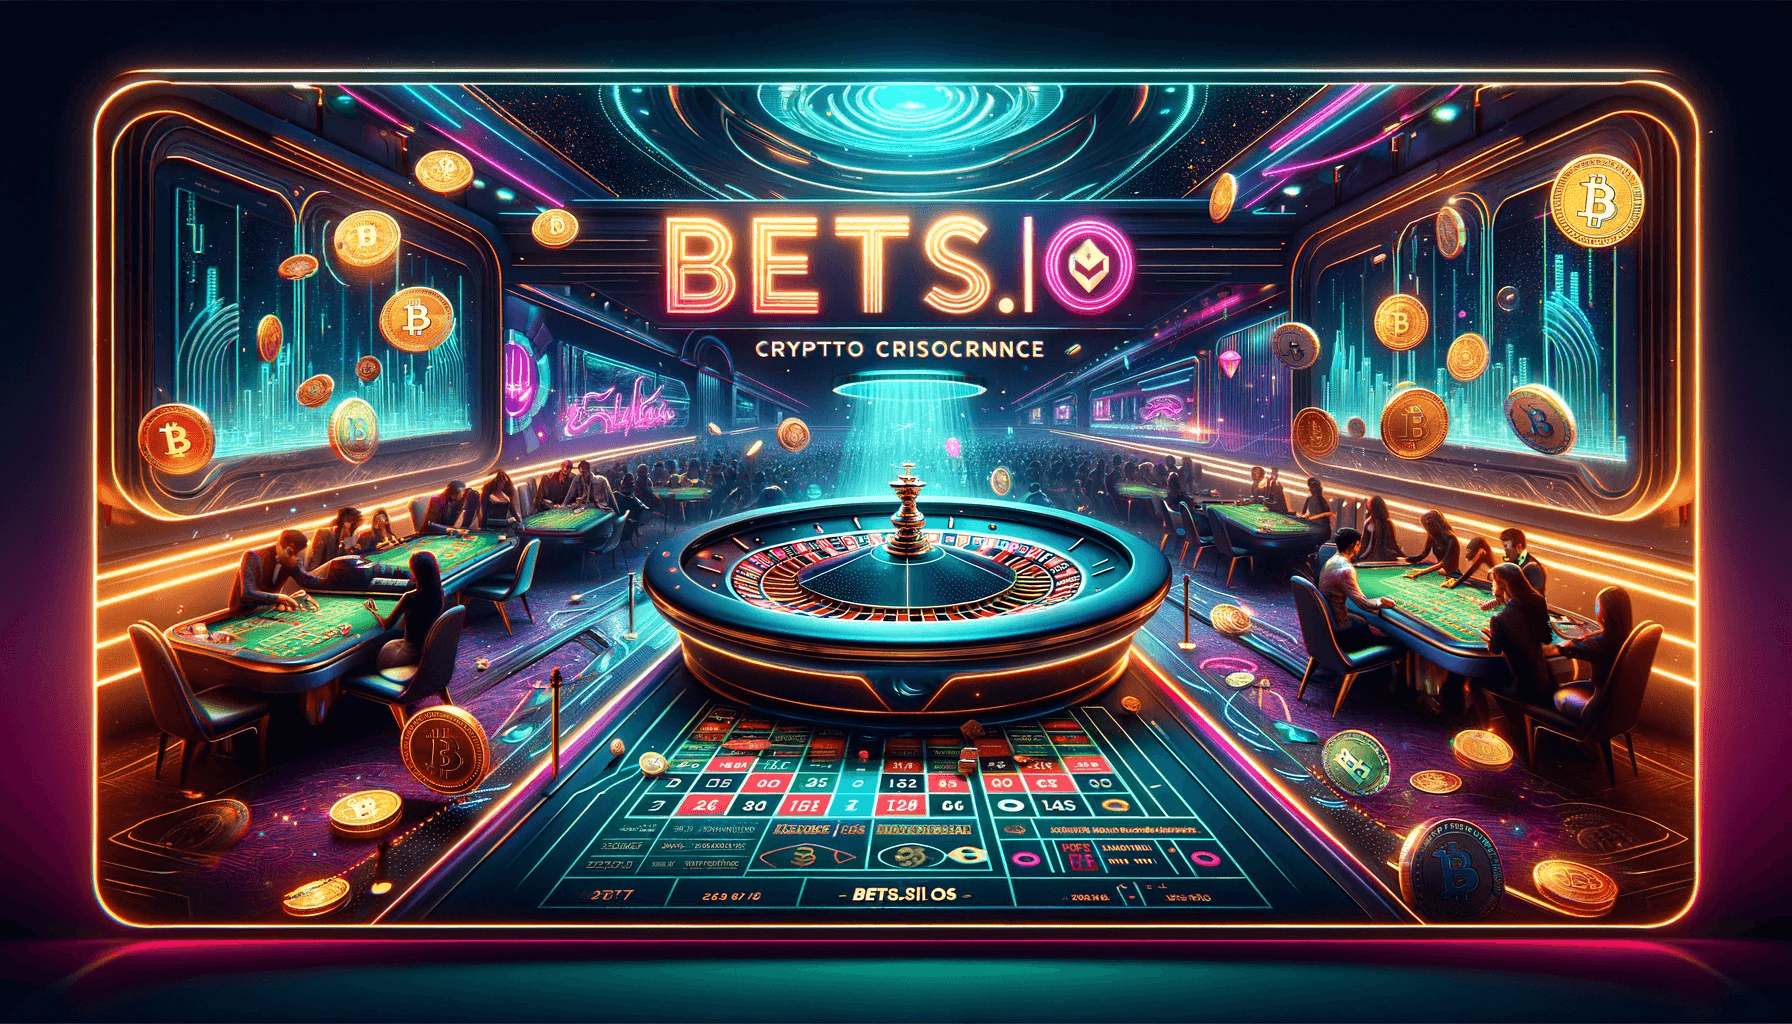 A dynamic banner image for Bets.io, showcasing a luxurious cryptocurrency casino with neon lighting. Prominent in the scene is a digital roulette table surrounded by diverse players, with the 'Bets.io' logo in bold neon lettering across the top, symbolizing advanced crypto gambling.